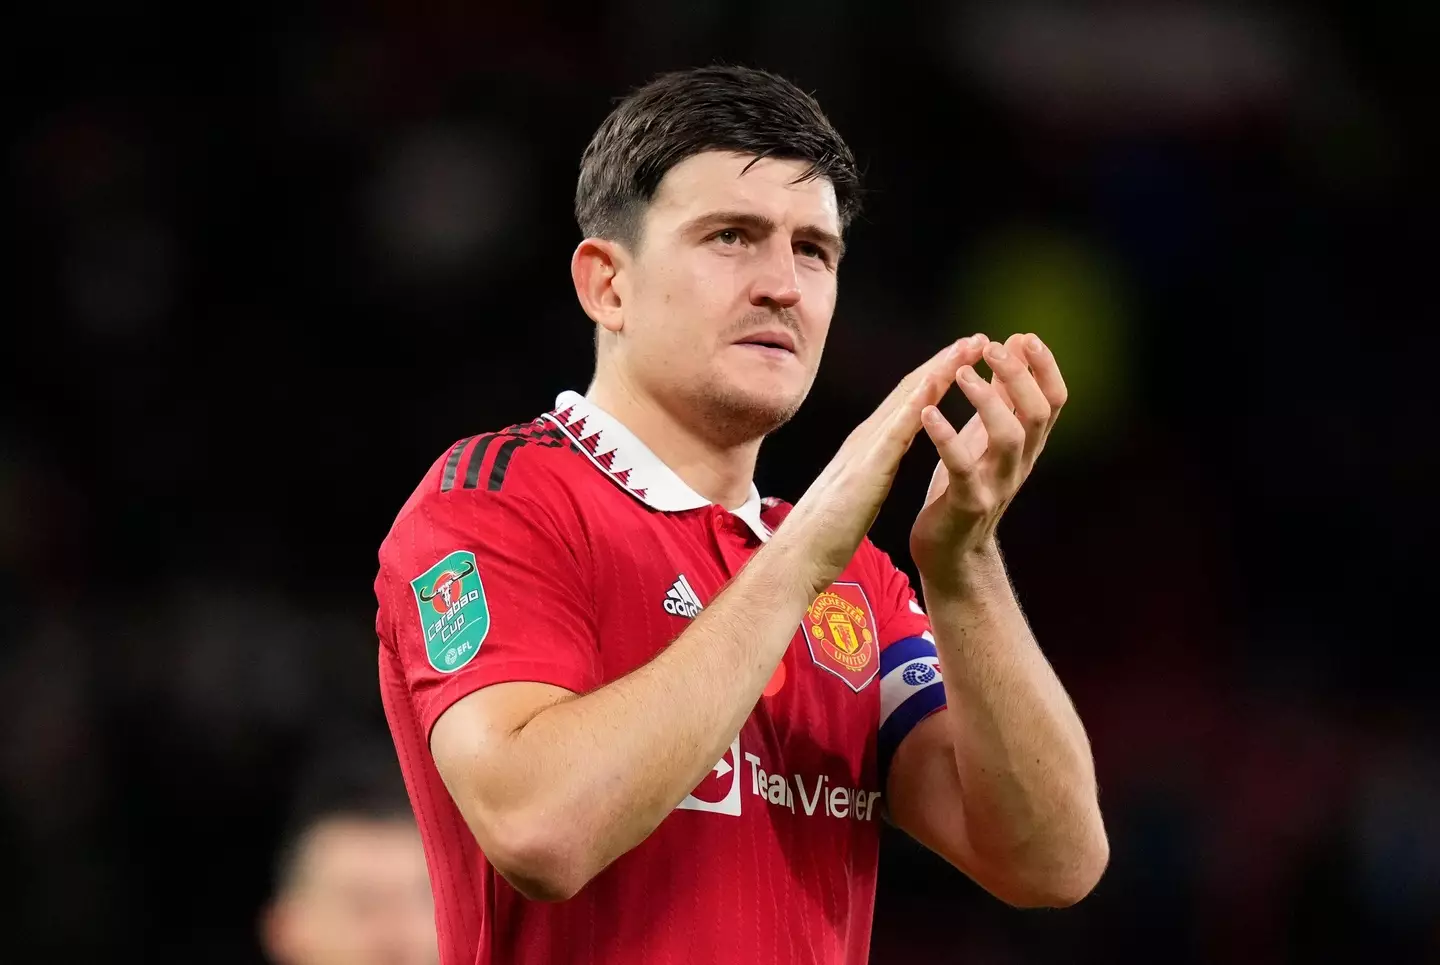 Maguire in action for Manchester United this season. (Image